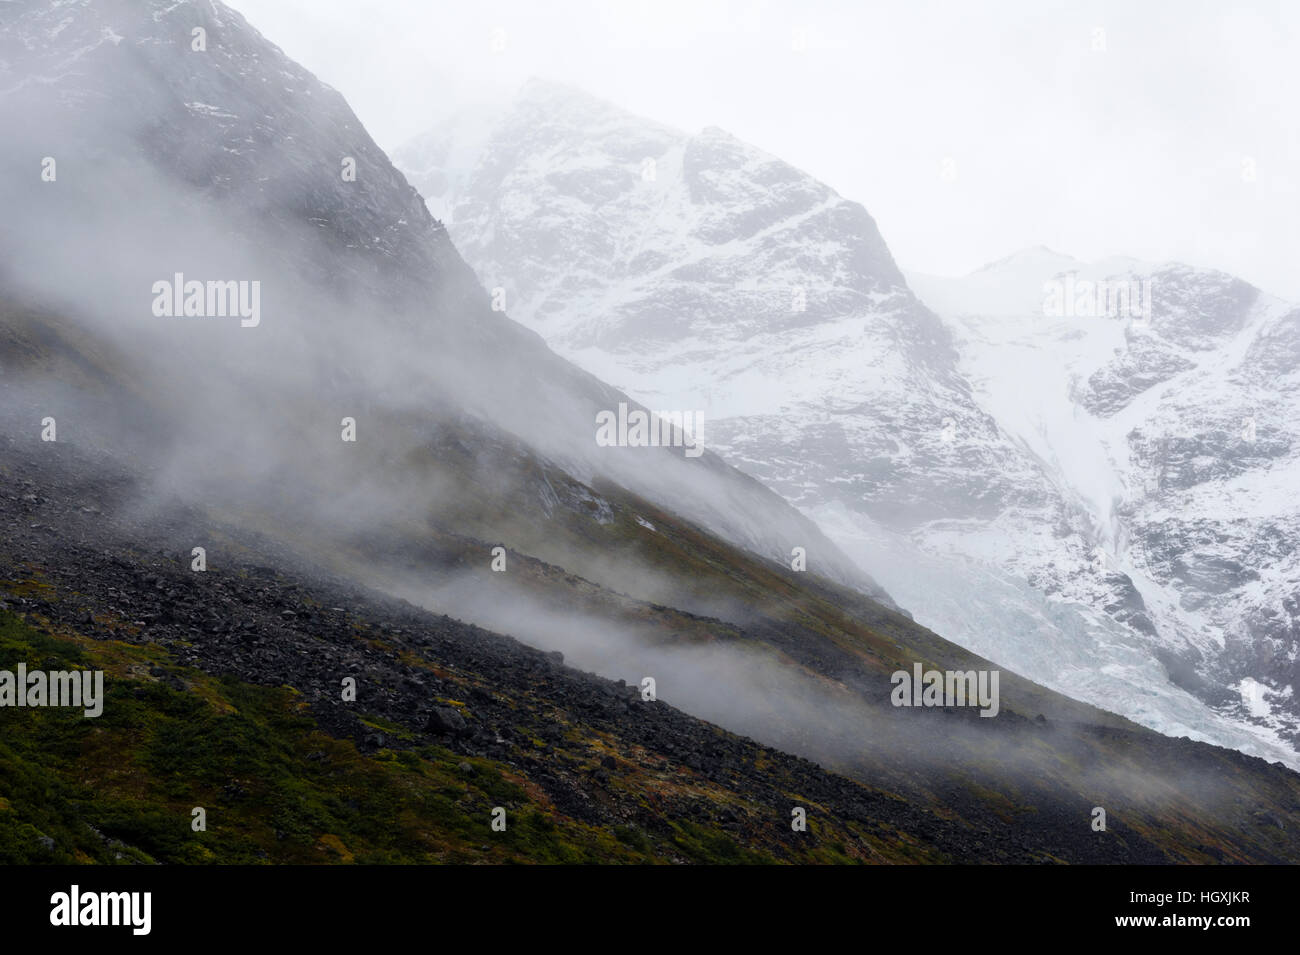 Cloud and mist shroud jagged and rugged mountain peaks during a rain storm in a fiord. Stock Photo